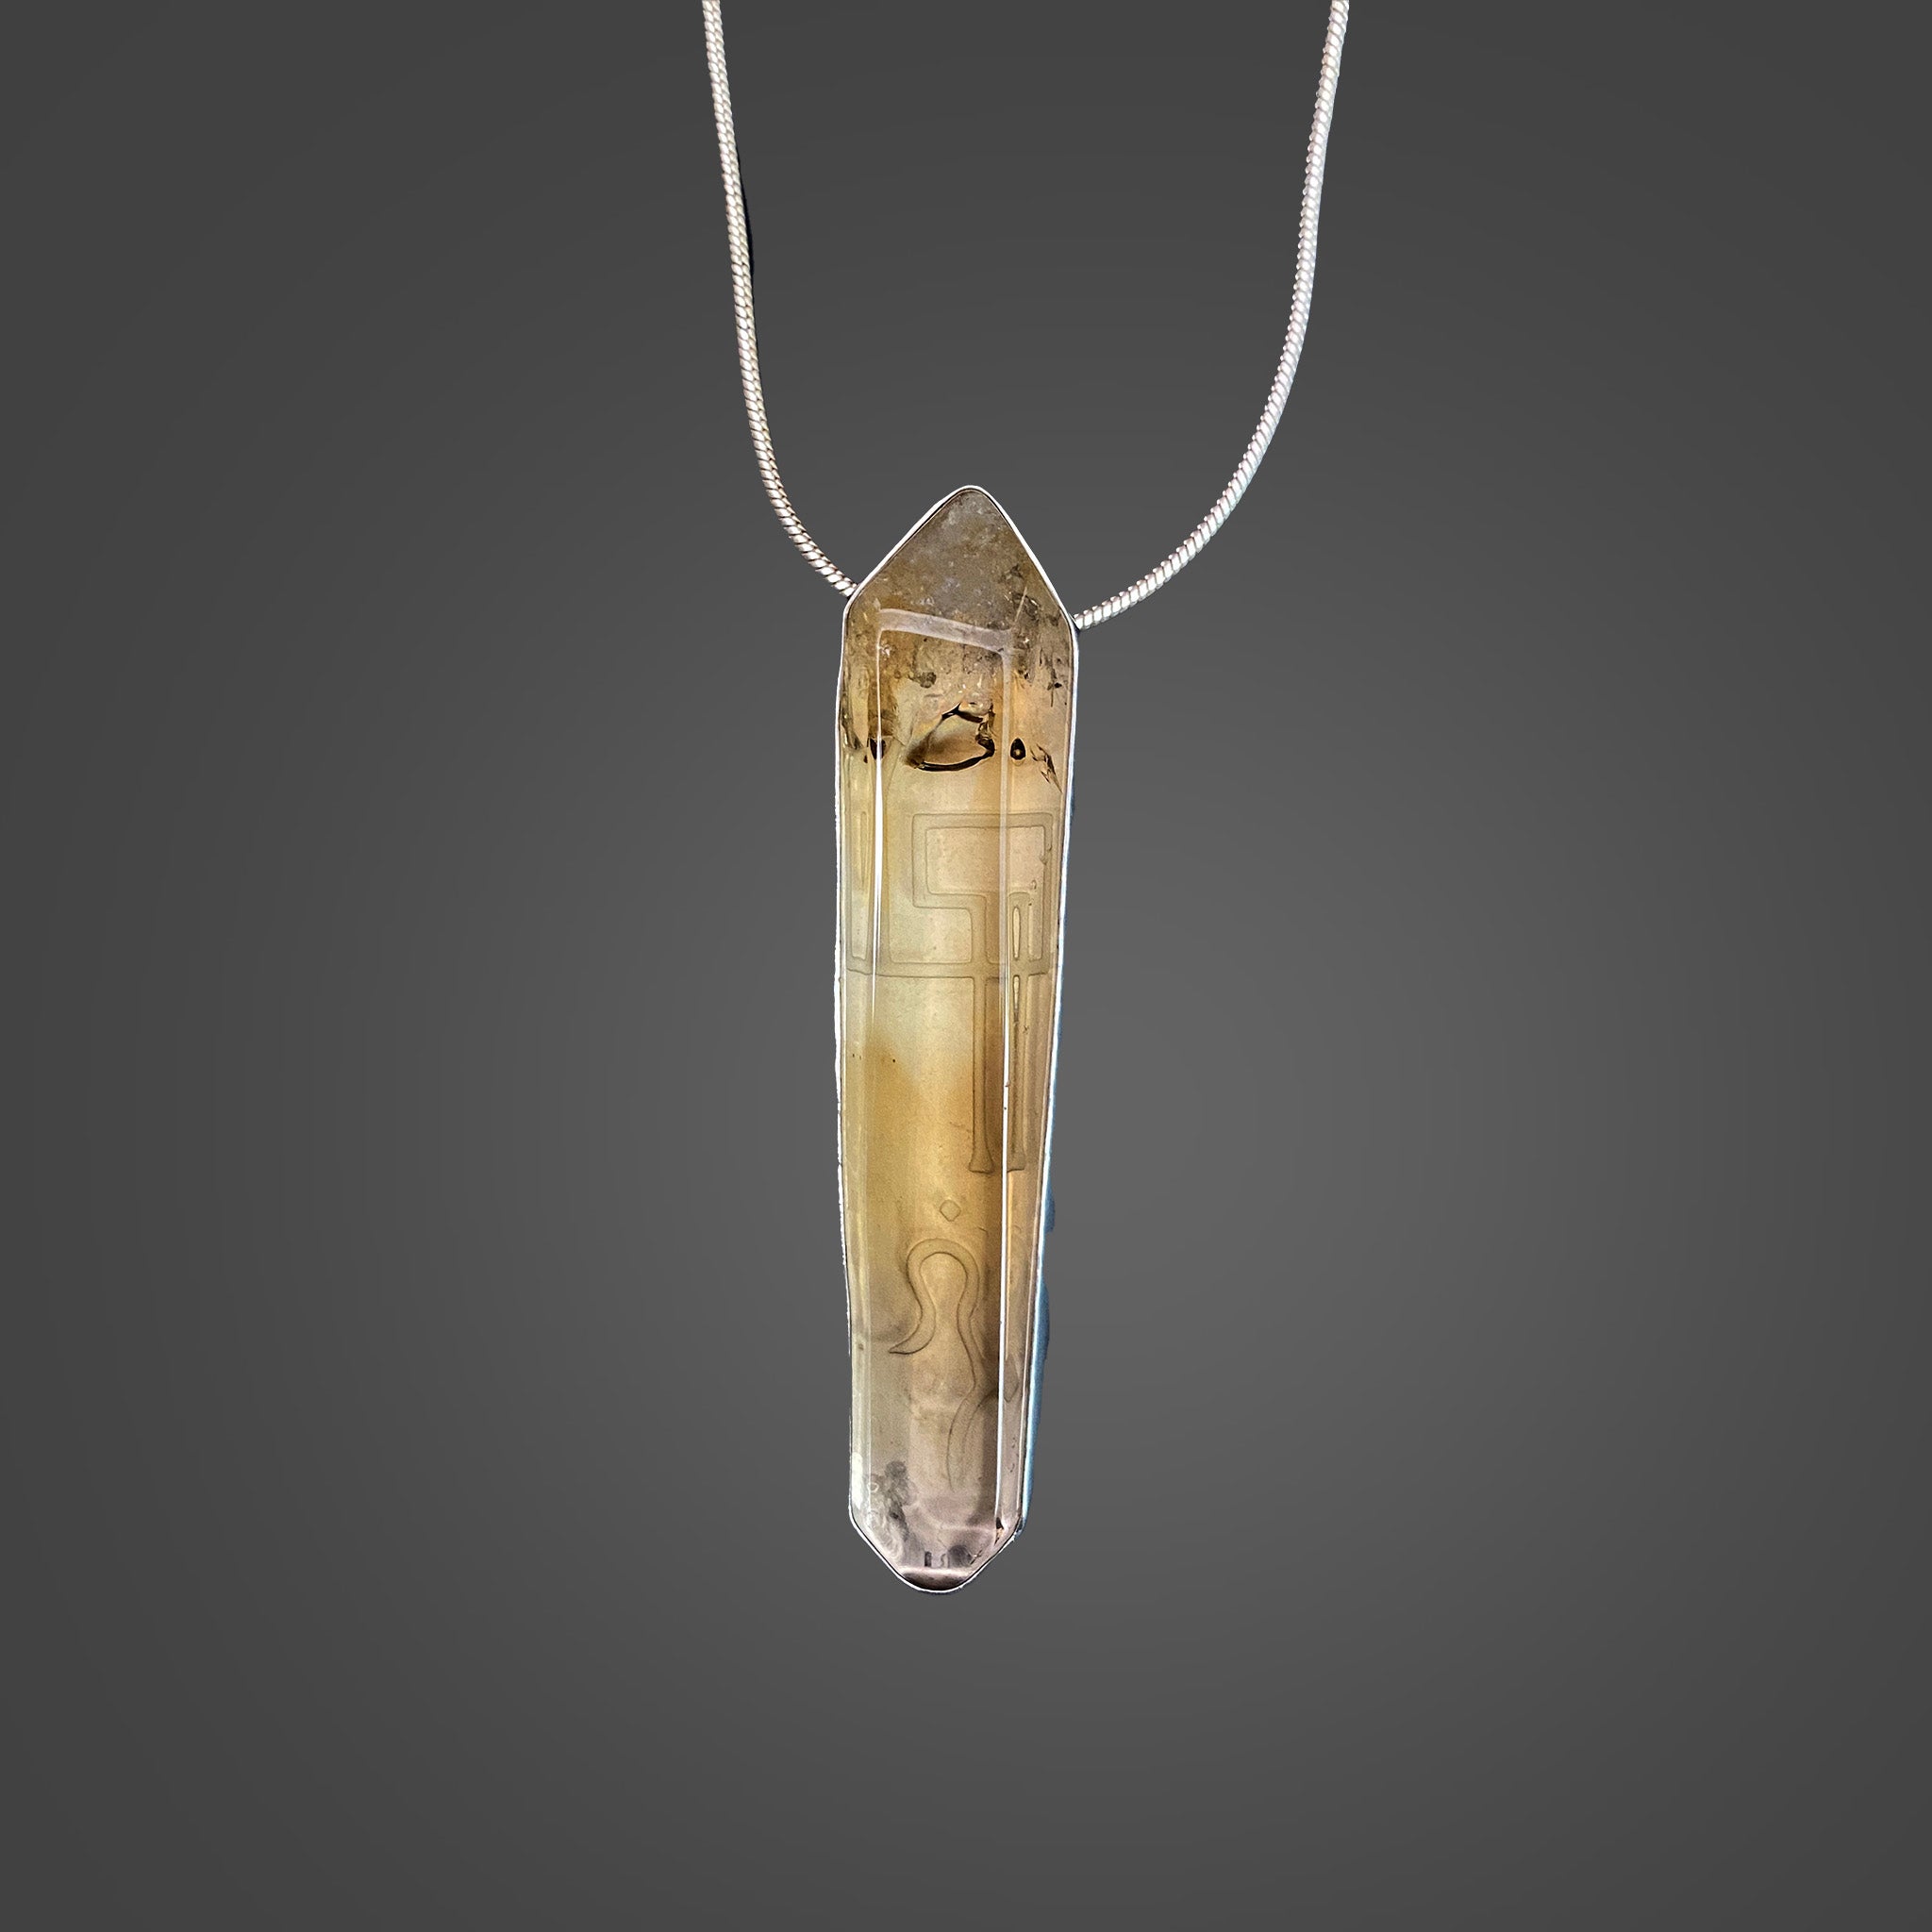 African Citrine Sterling Silver Pendant with Divine Feminine and Sacred Masculine Symbols